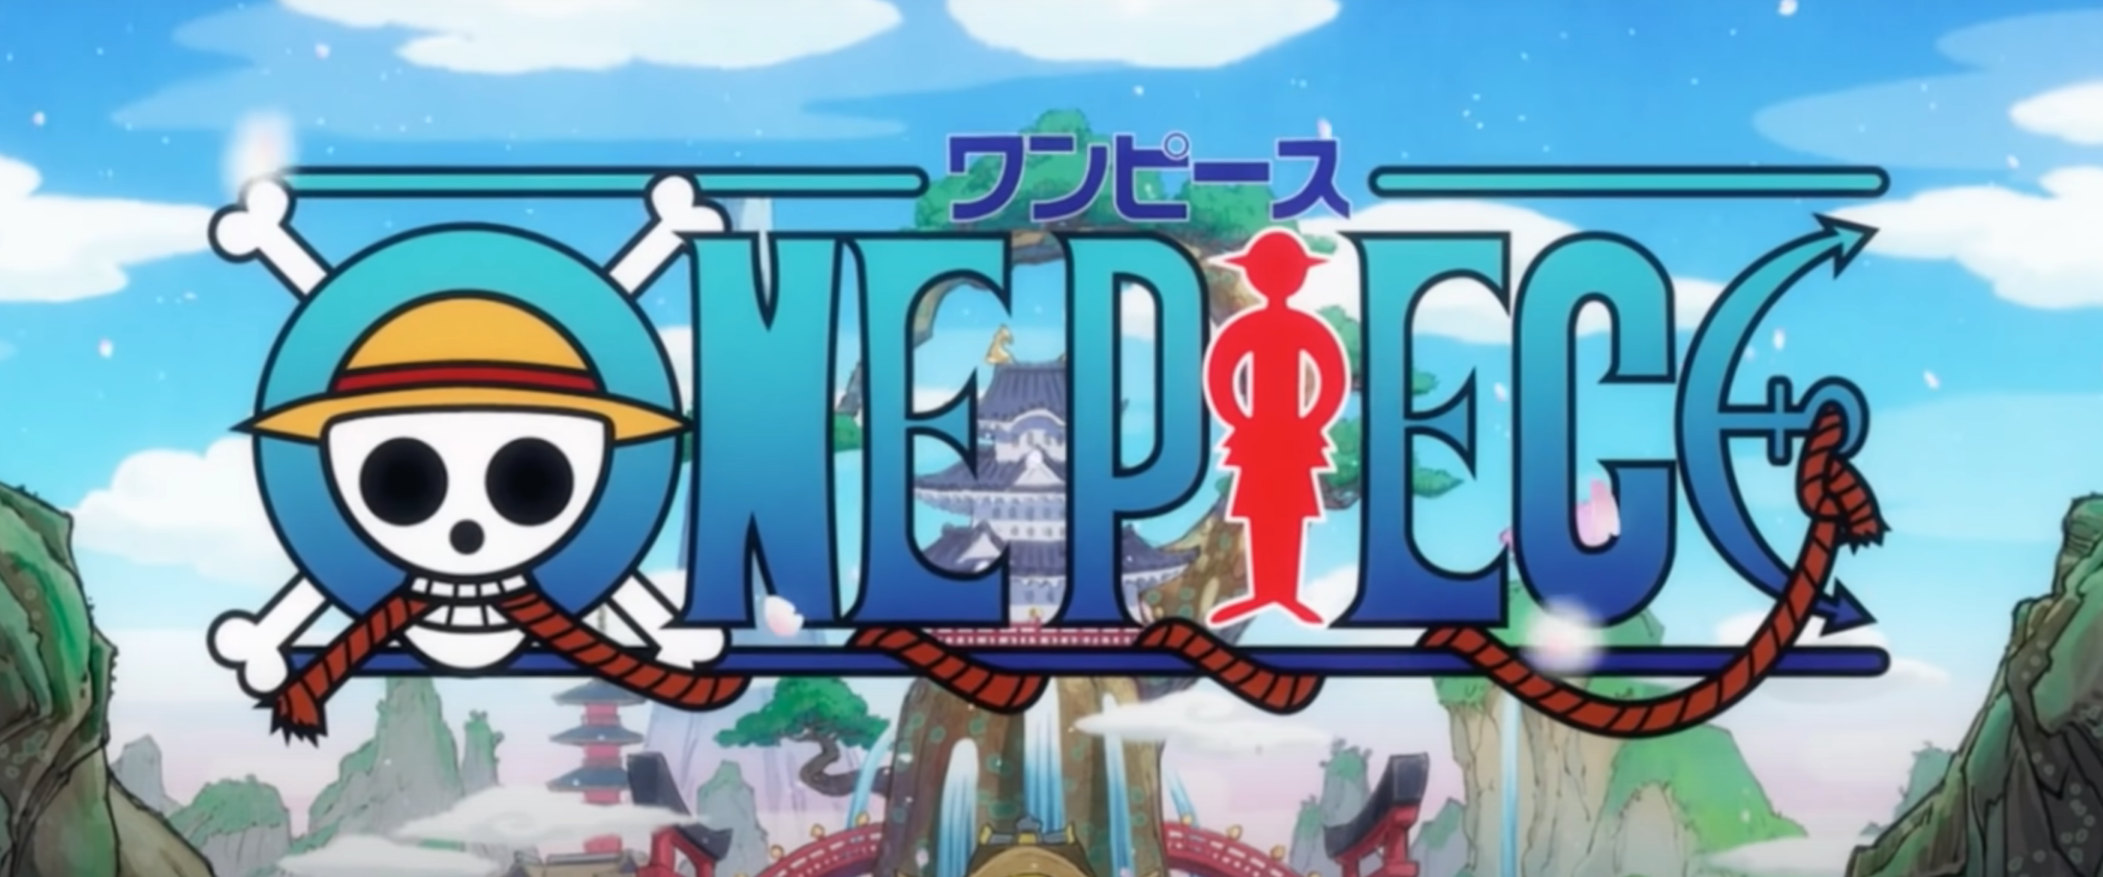 Anime Trending on X: One Piece celebrates 1000 episodes with a